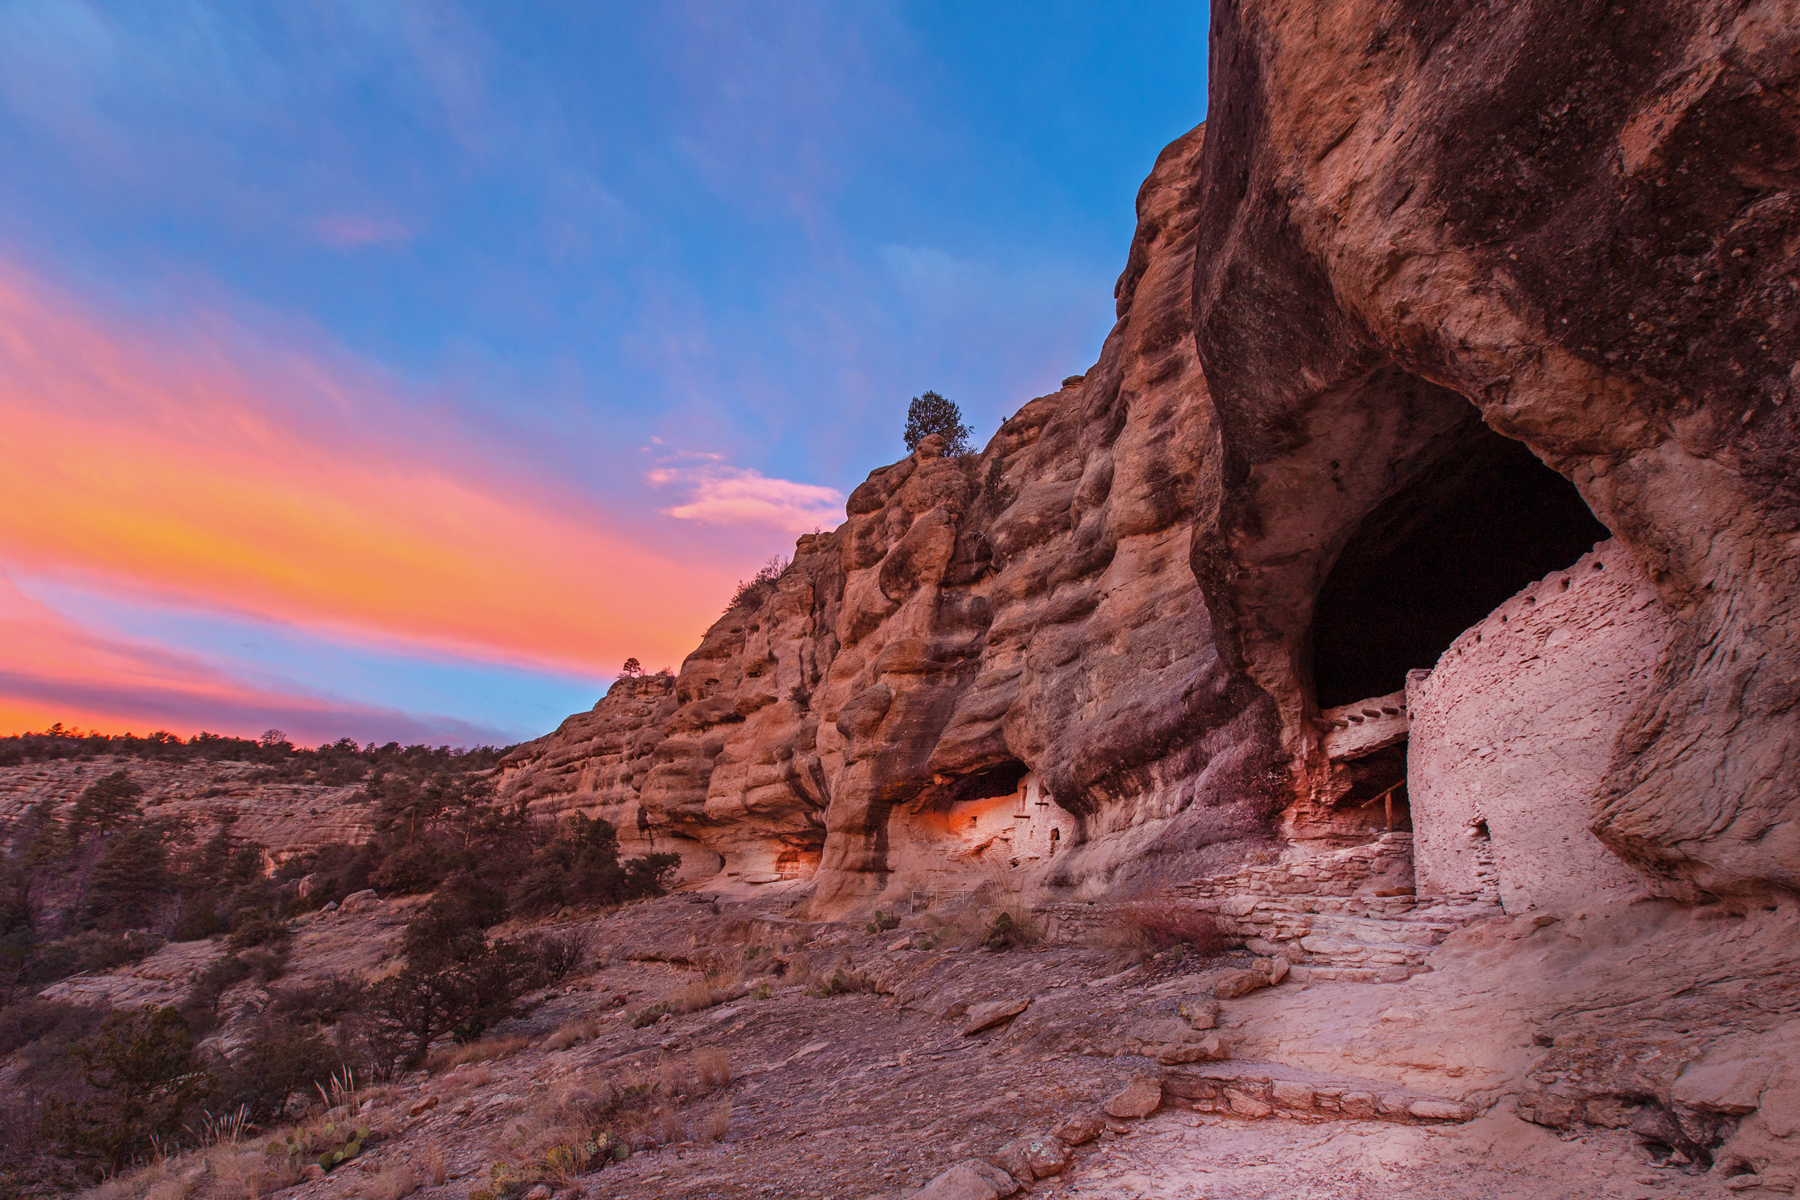 Sunrise view of Gila Cliff Dwellings with brilliant sky.